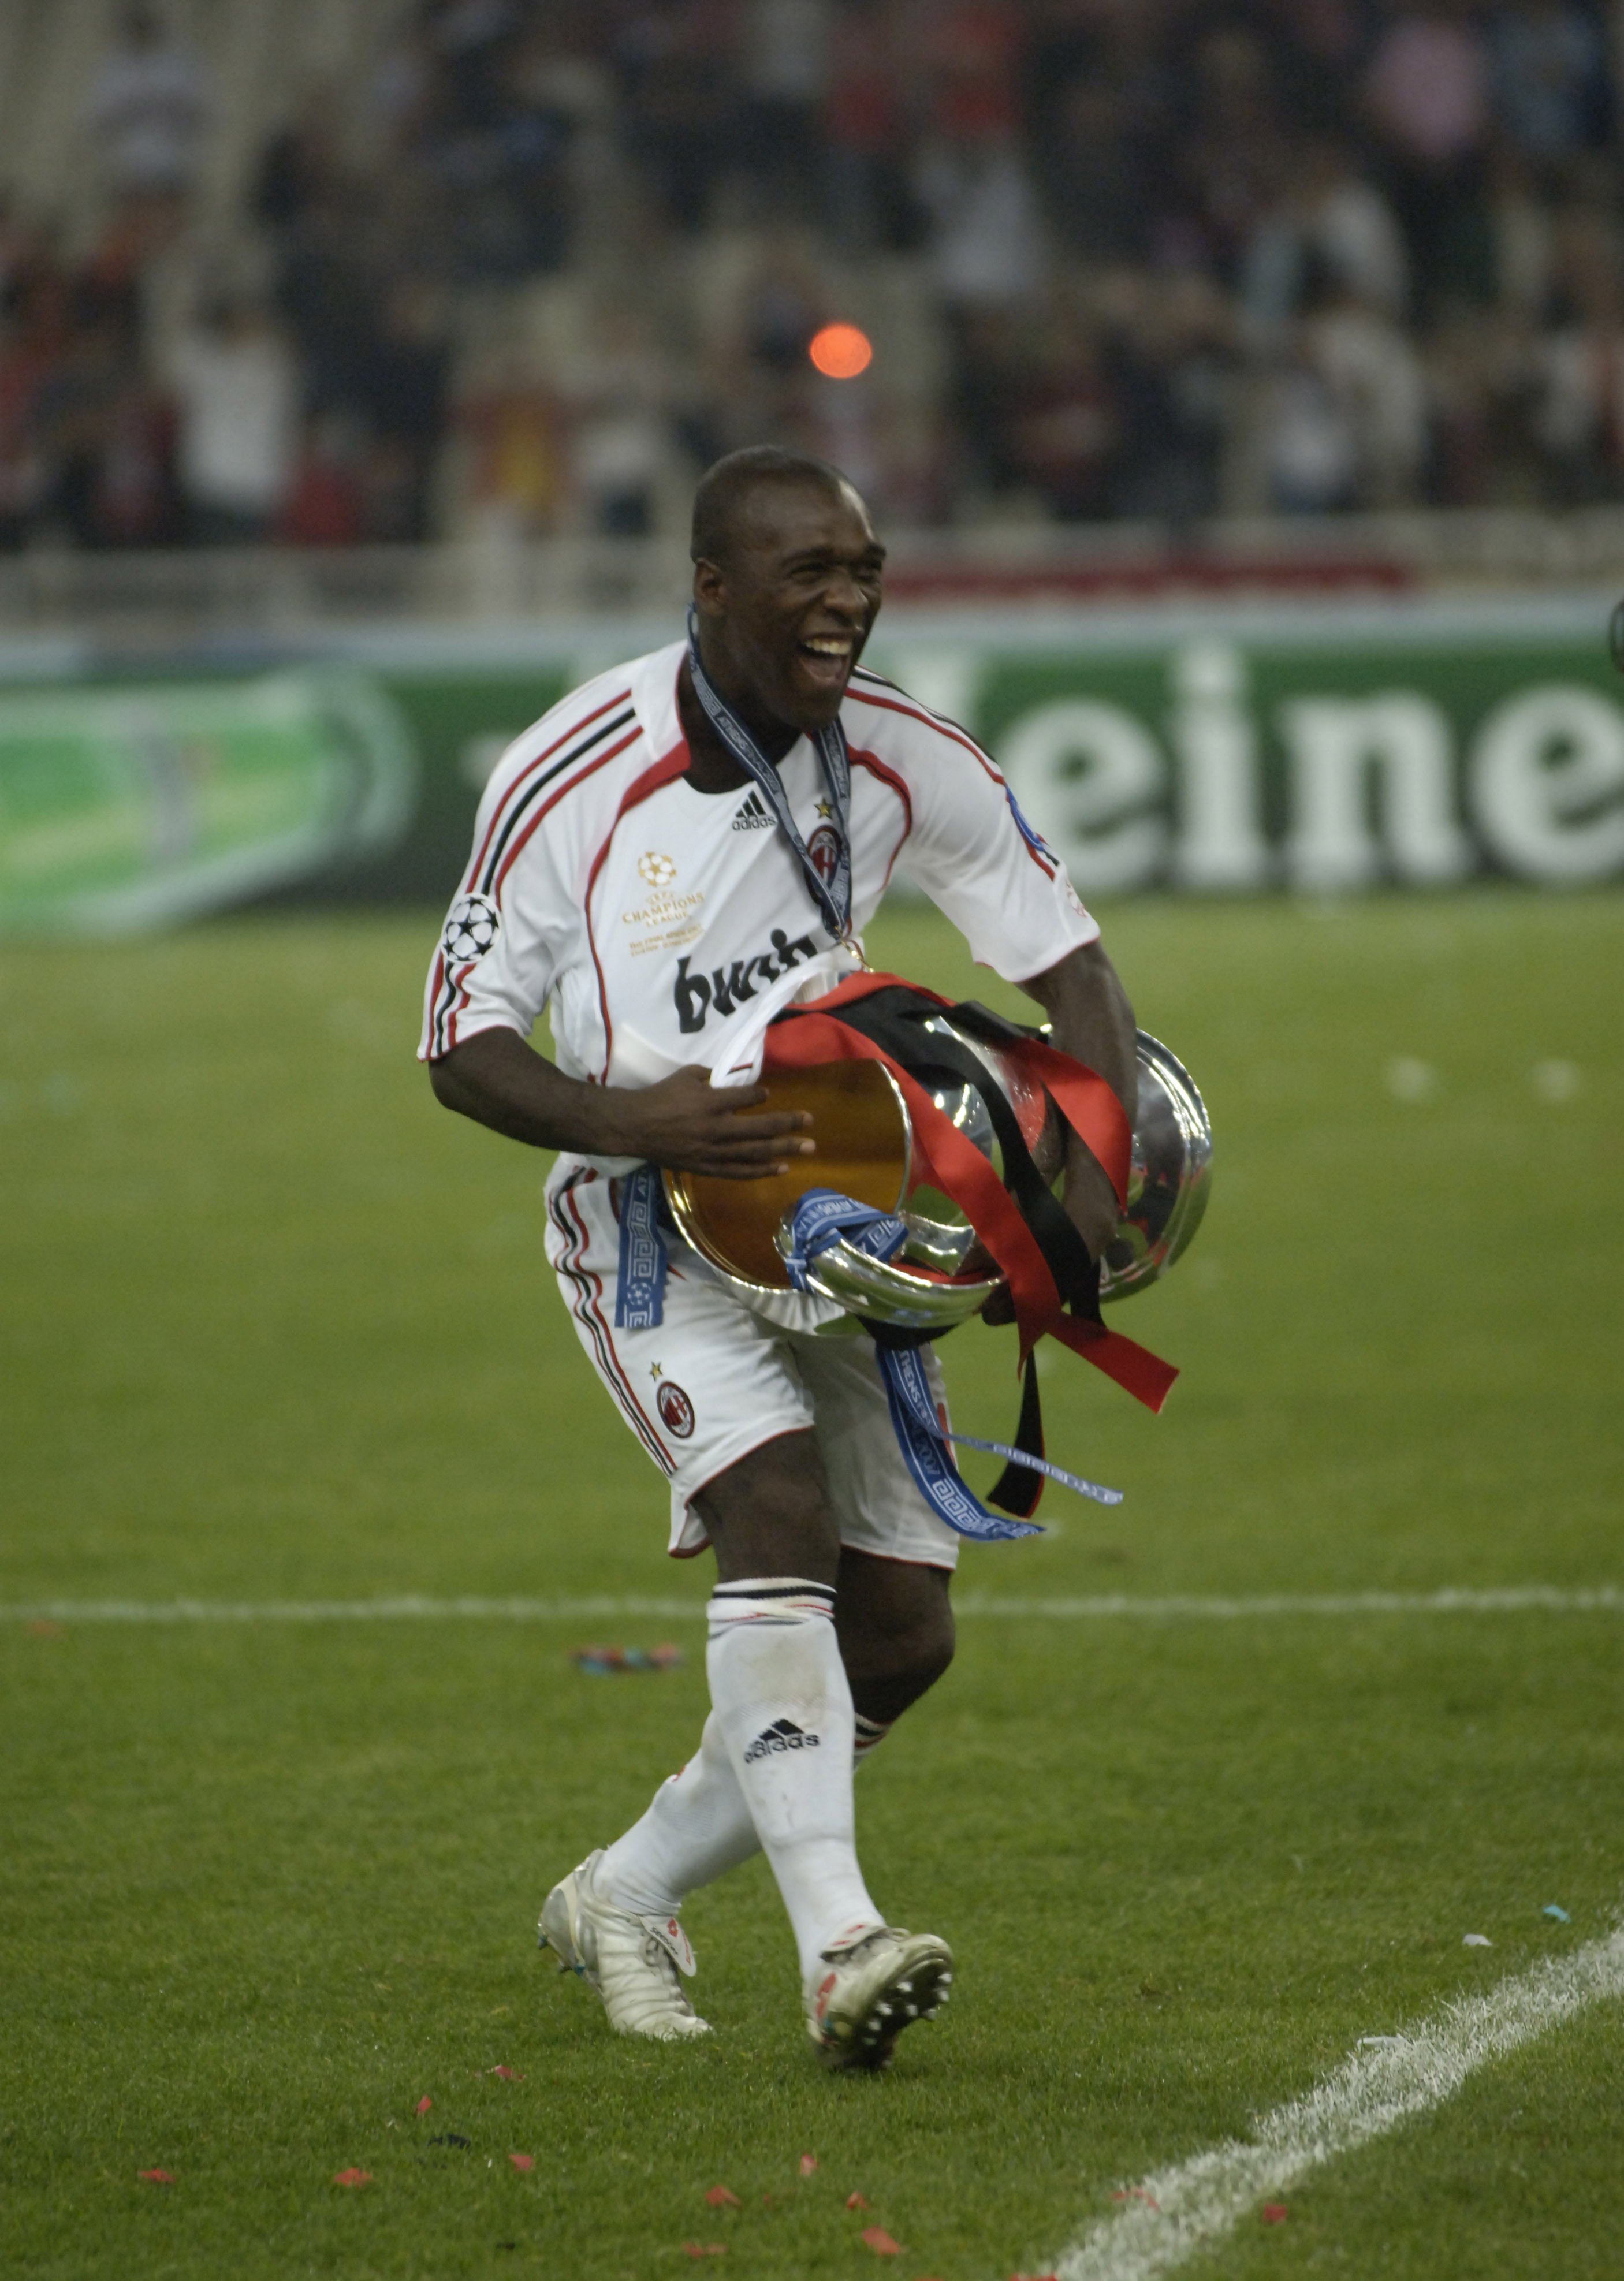 Sport, Football, UEFA Champions League Final, Athens, 23rd May 2007, AC Milan 2 v Liverpool 1, AC Milan's Clarence Seedorf celebrates with the trophy  (Photo by Bob Thomas Sports Photography via Getty Images)